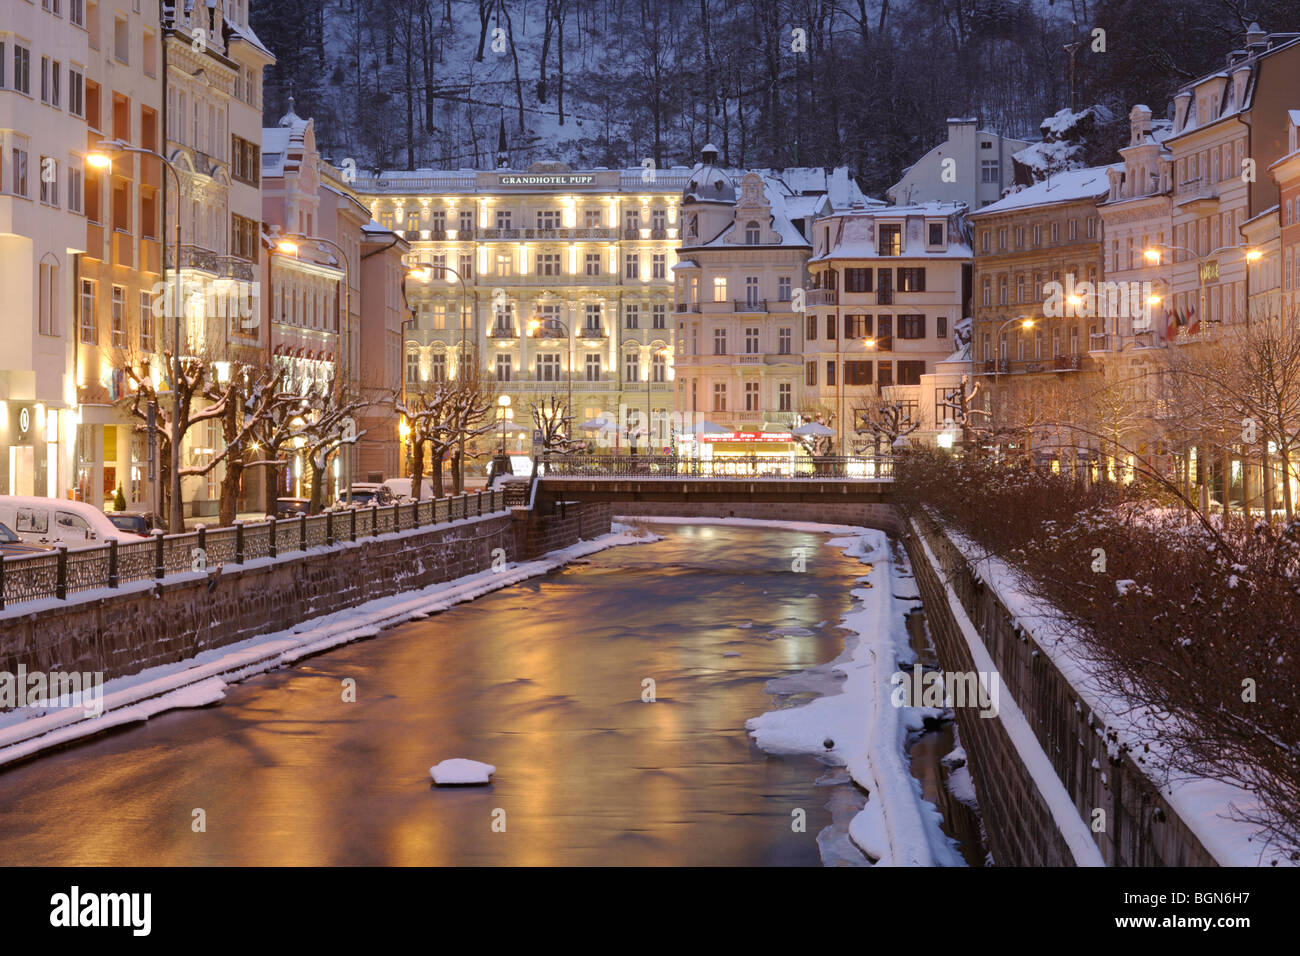 Historic old town of Karlsbad at night, Carlsbad, Karlovy Vary, west Bohemia, Czech republic,Europe Stock Photo